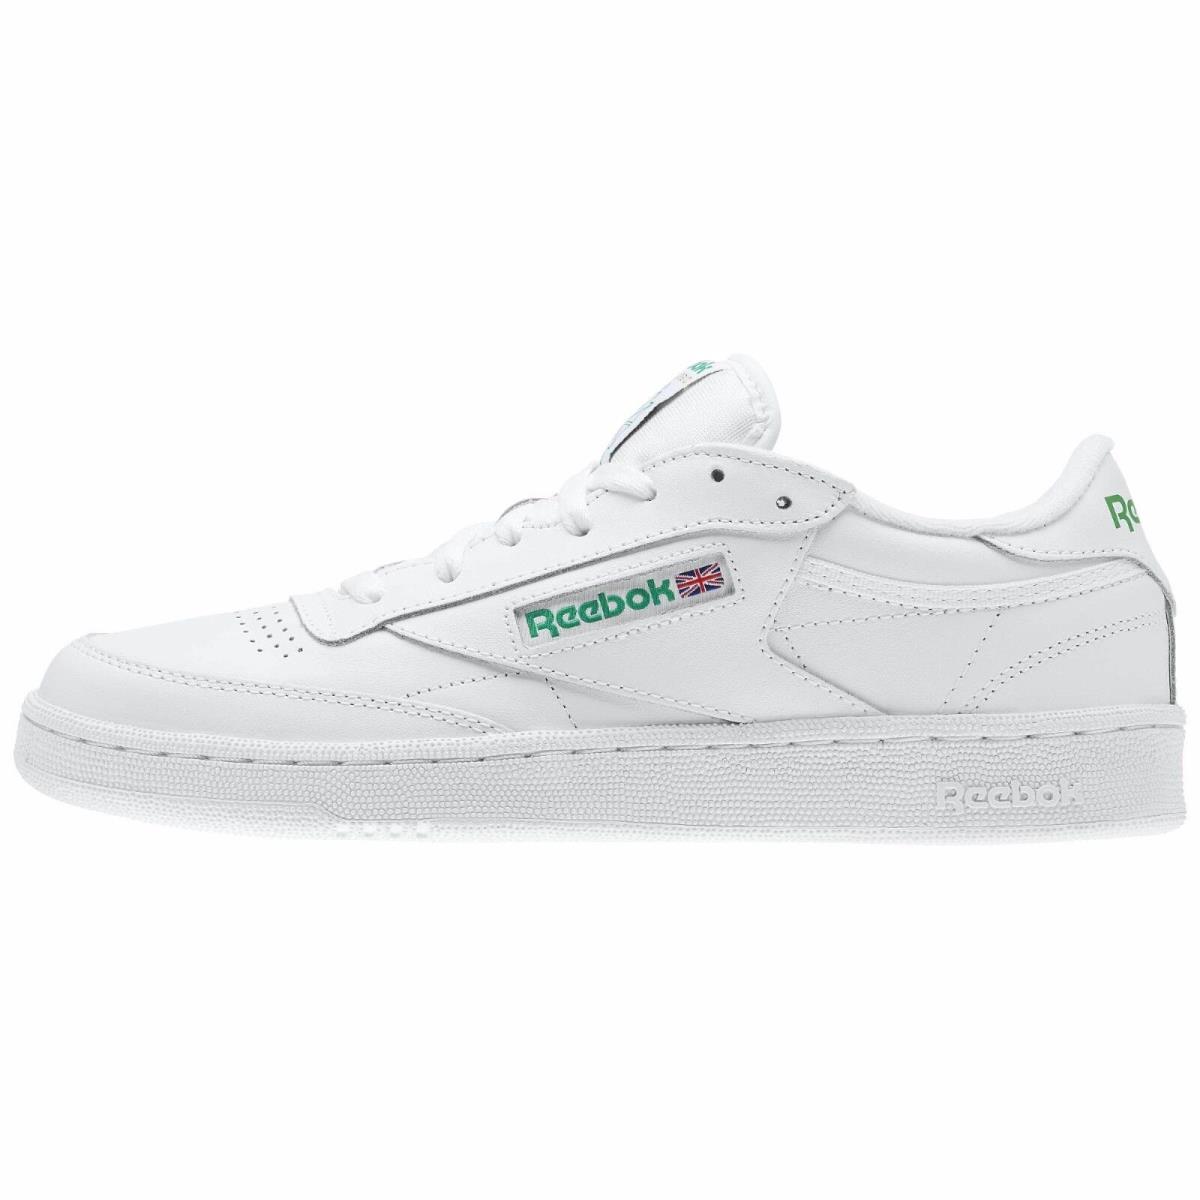 Reebok Club C 85 AR0456 White/green Leather Casual Men Shoes